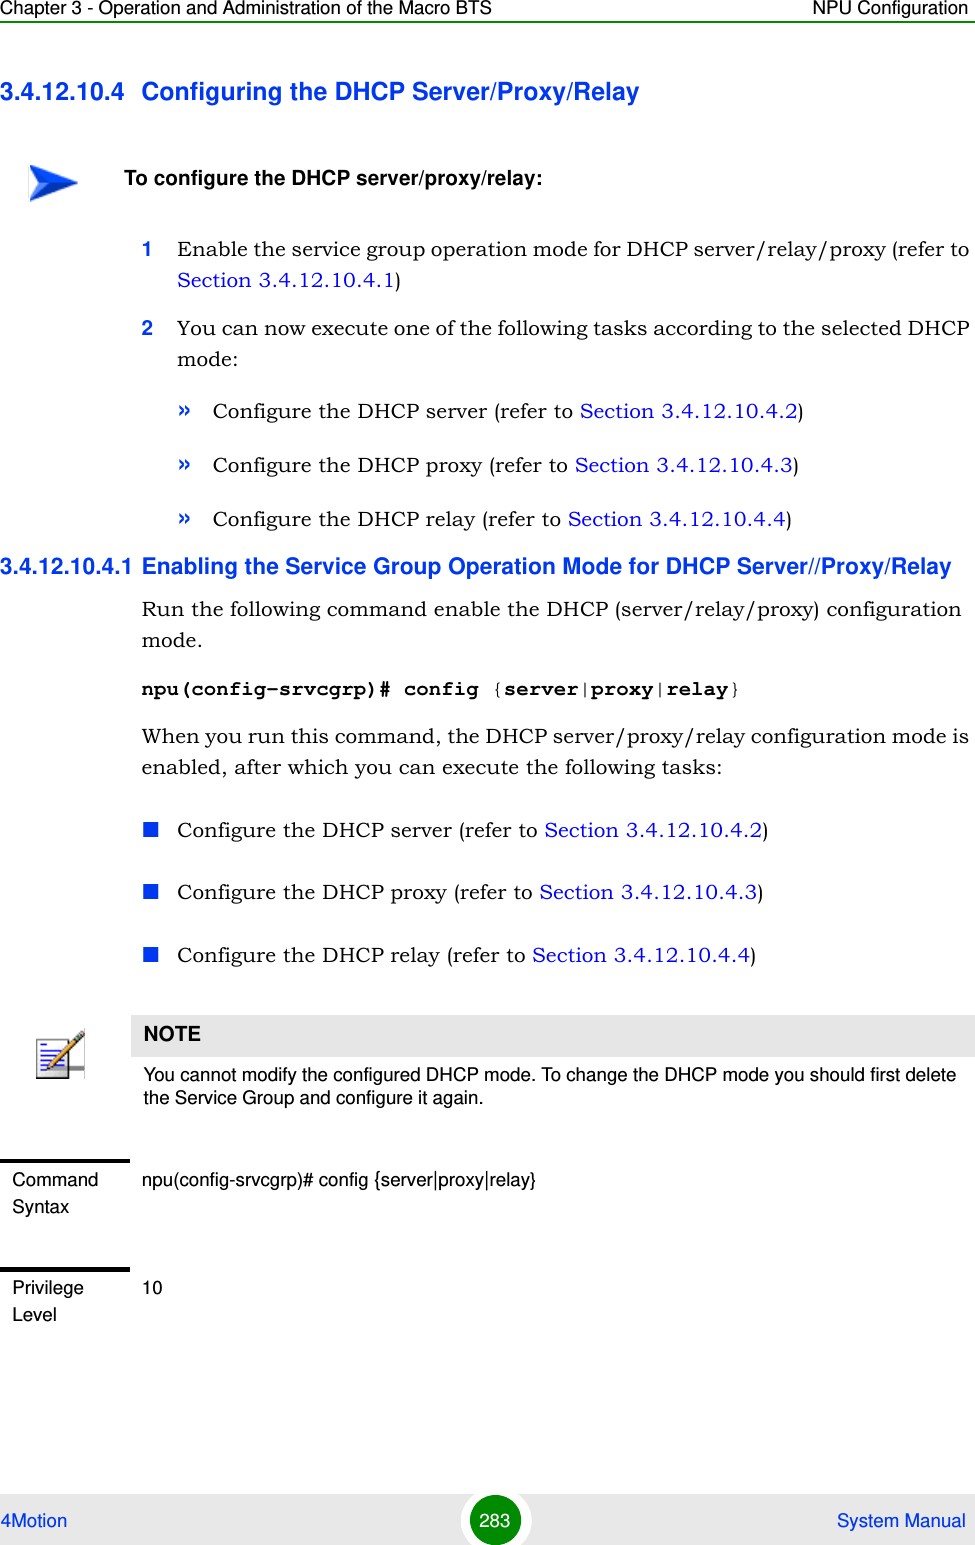 Chapter 3 - Operation and Administration of the Macro BTS NPU Configuration4Motion 283  System Manual3.4.12.10.4 Configuring the DHCP Server/Proxy/Relay 1Enable the service group operation mode for DHCP server/relay/proxy (refer to Section 3.4.12.10.4.1)2You can now execute one of the following tasks according to the selected DHCP mode:»Configure the DHCP server (refer to Section 3.4.12.10.4.2)»Configure the DHCP proxy (refer to Section 3.4.12.10.4.3)»Configure the DHCP relay (refer to Section 3.4.12.10.4.4)3.4.12.10.4.1 Enabling the Service Group Operation Mode for DHCP Server//Proxy/RelayRun the following command enable the DHCP (server/relay/proxy) configuration mode.npu(config-srvcgrp)# config {server|proxy|relay}When you run this command, the DHCP server/proxy/relay configuration mode is enabled, after which you can execute the following tasks:Configure the DHCP server (refer to Section 3.4.12.10.4.2)Configure the DHCP proxy (refer to Section 3.4.12.10.4.3)Configure the DHCP relay (refer to Section 3.4.12.10.4.4)To configure the DHCP server/proxy/relay:NOTEYou cannot modify the configured DHCP mode. To change the DHCP mode you should first delete the Service Group and configure it again.Command Syntaxnpu(config-srvcgrp)# config {server|proxy|relay}Privilege Level10